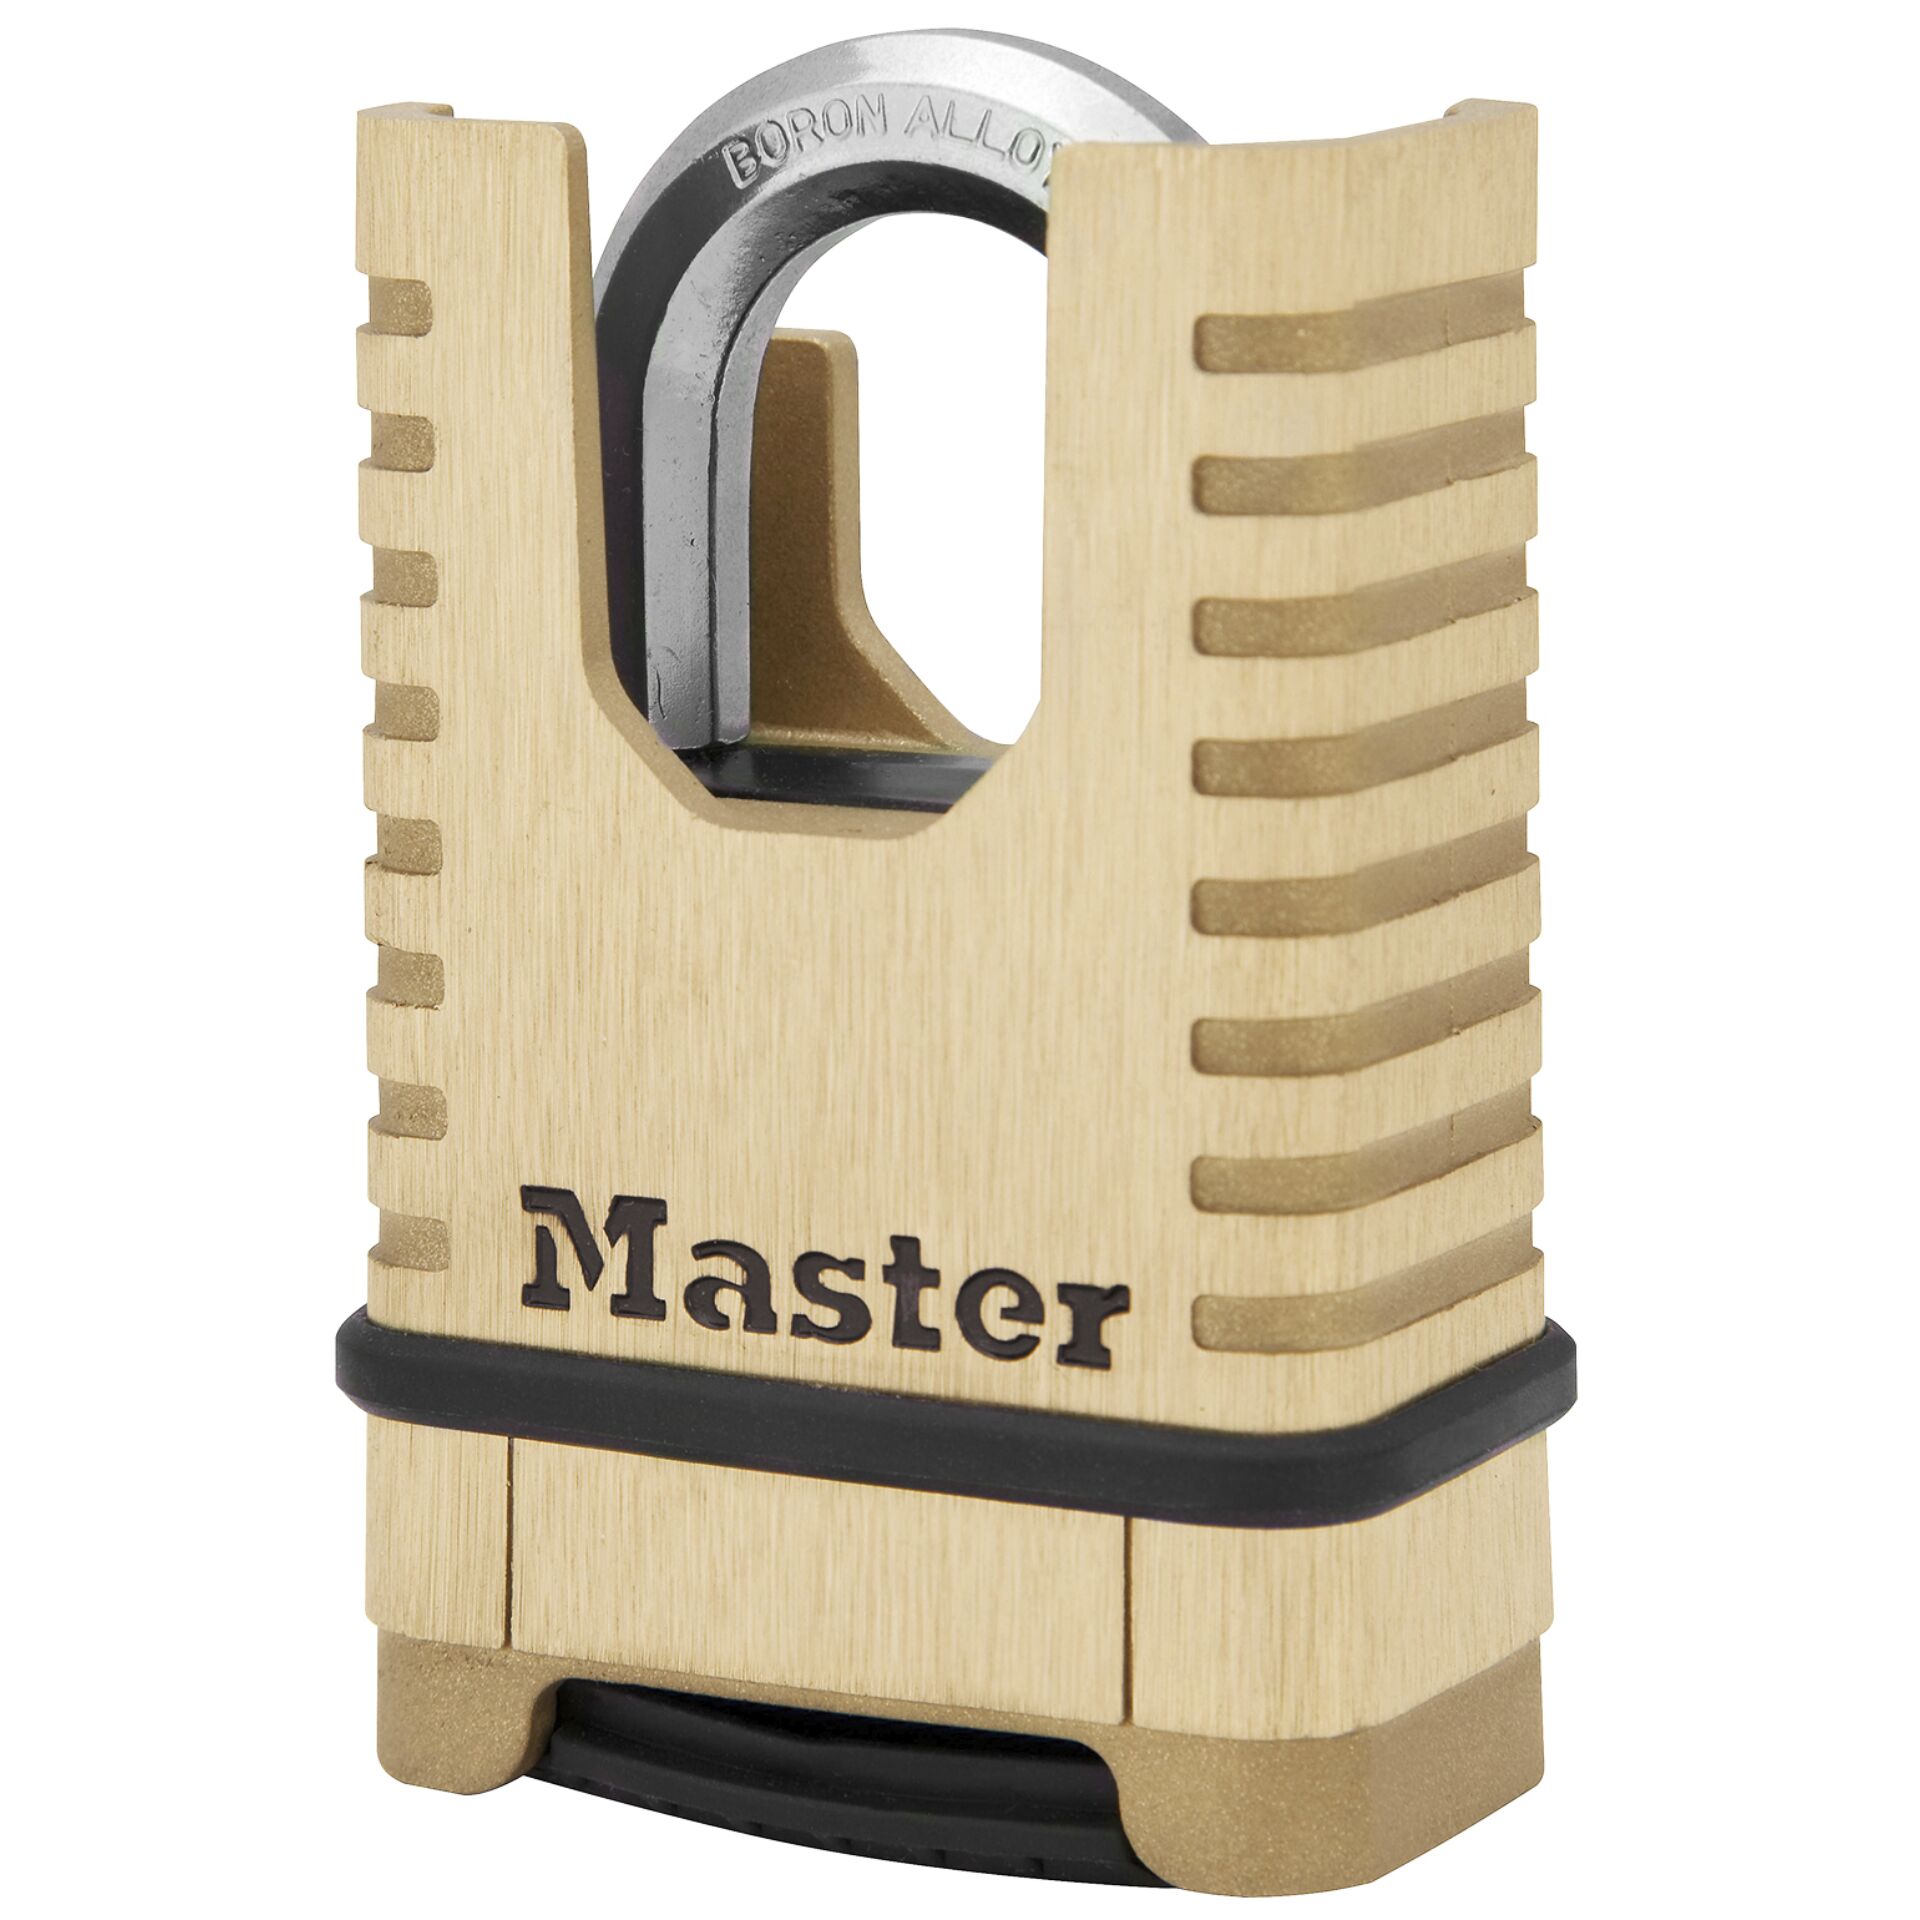 Master Lock Excell Padlock with bordered Shackle     M1177EU